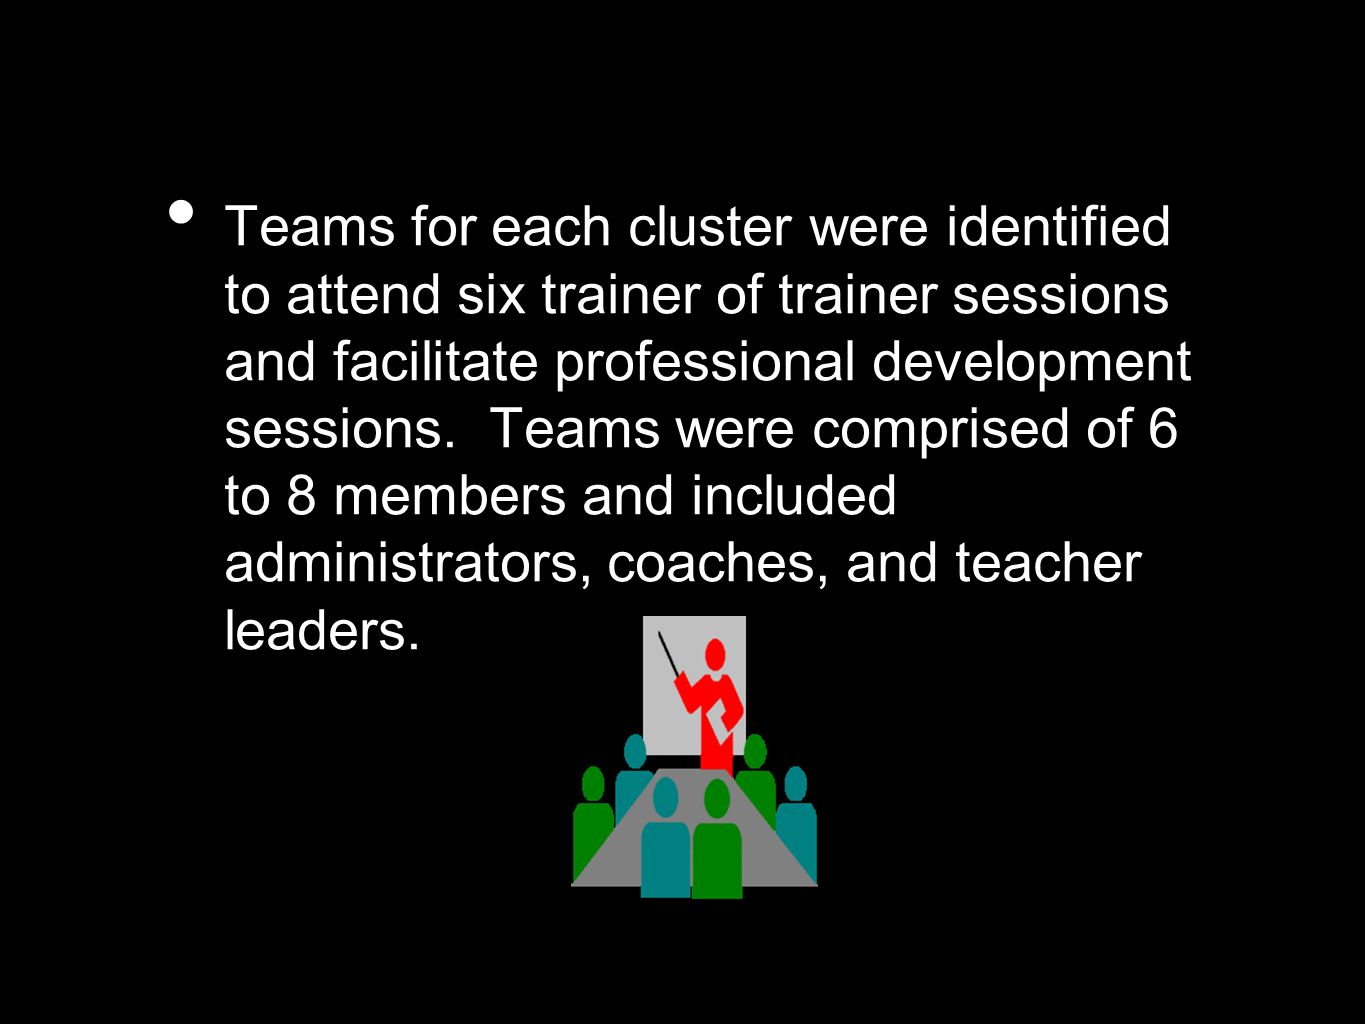 Teams for each cluster were identified to attend six trainer of trainer sessions and facilitate professional development sessions.